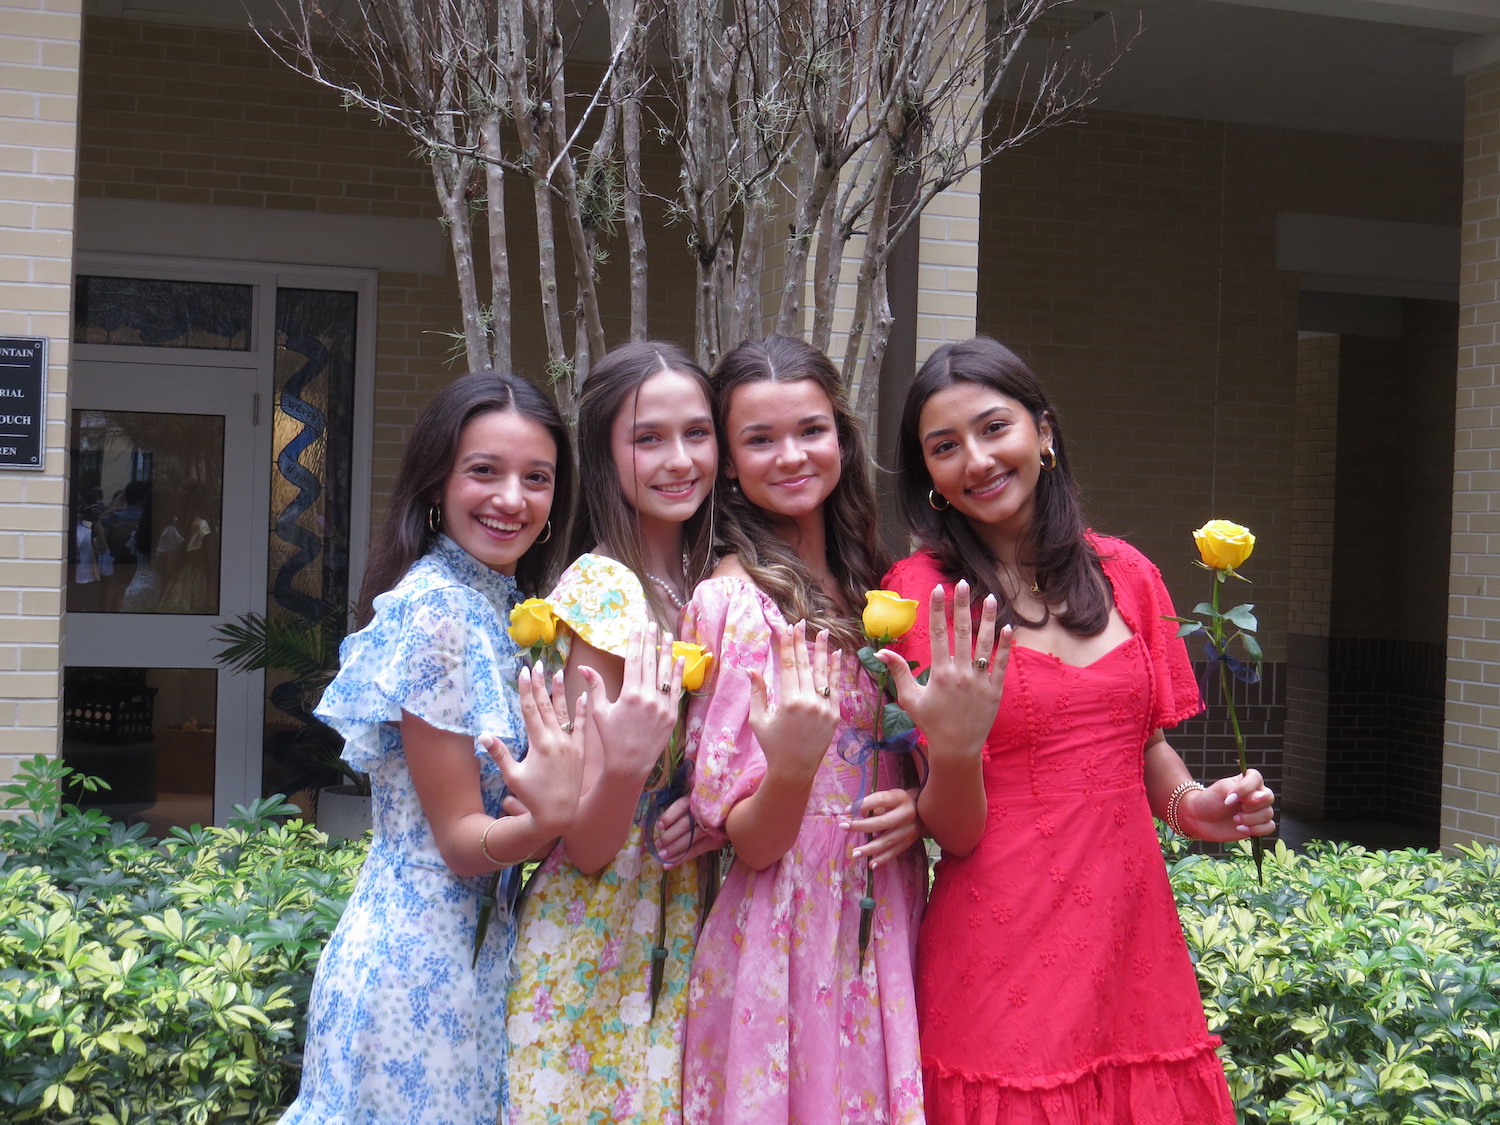 The Class of 2025 showed out in a display of pink, blue, and florals at this years Junior Ring ceremony. 